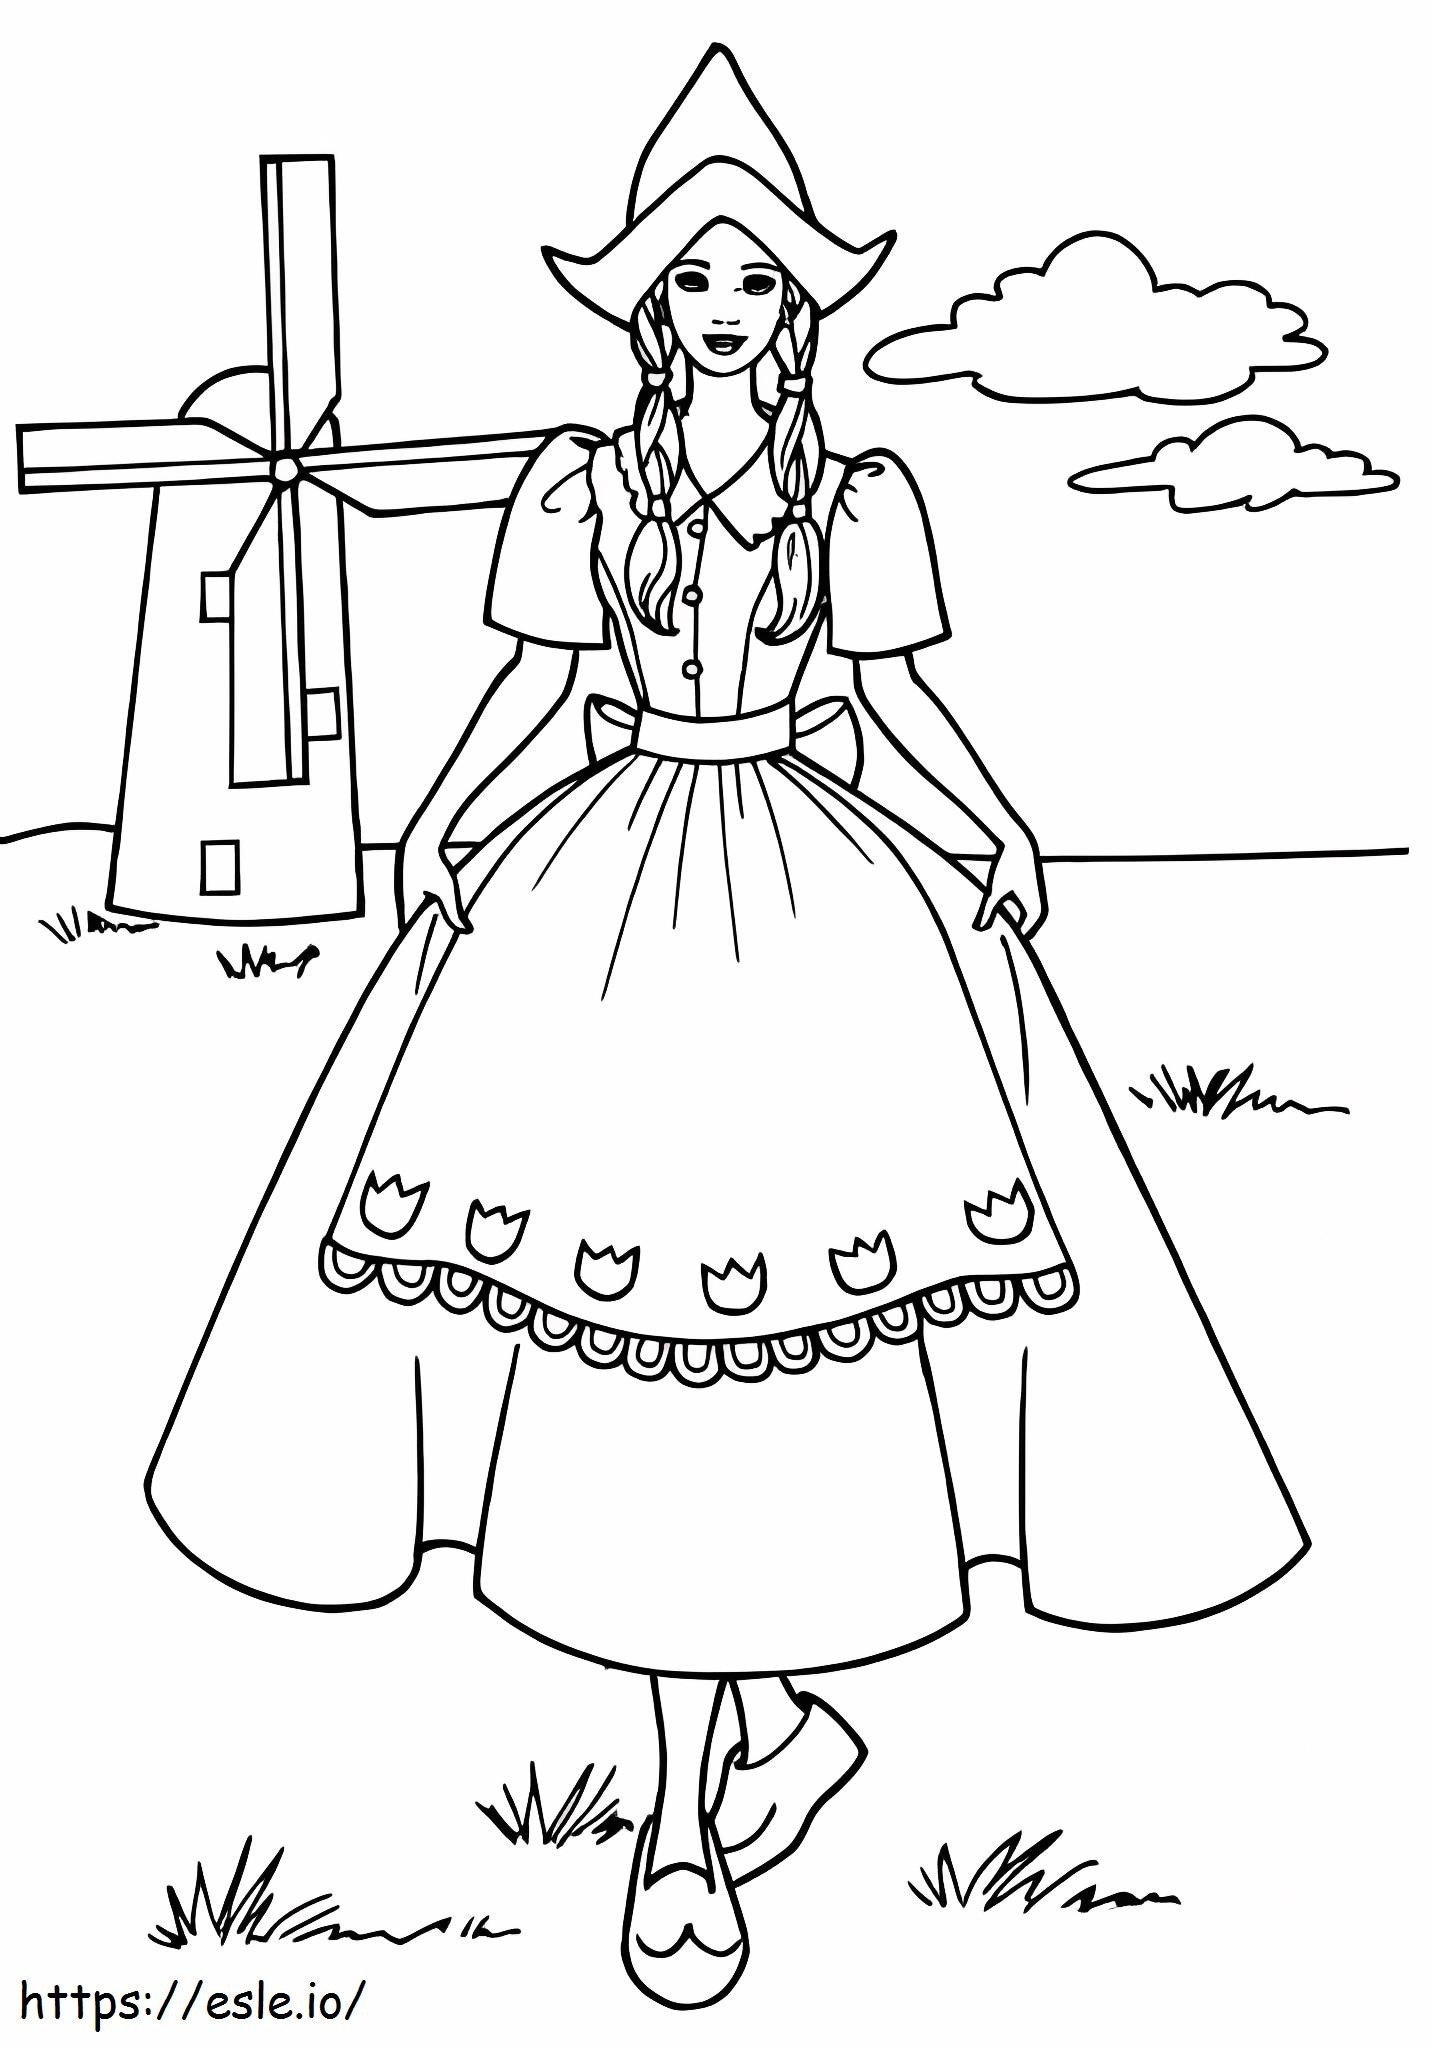 Dutch Lady coloring page